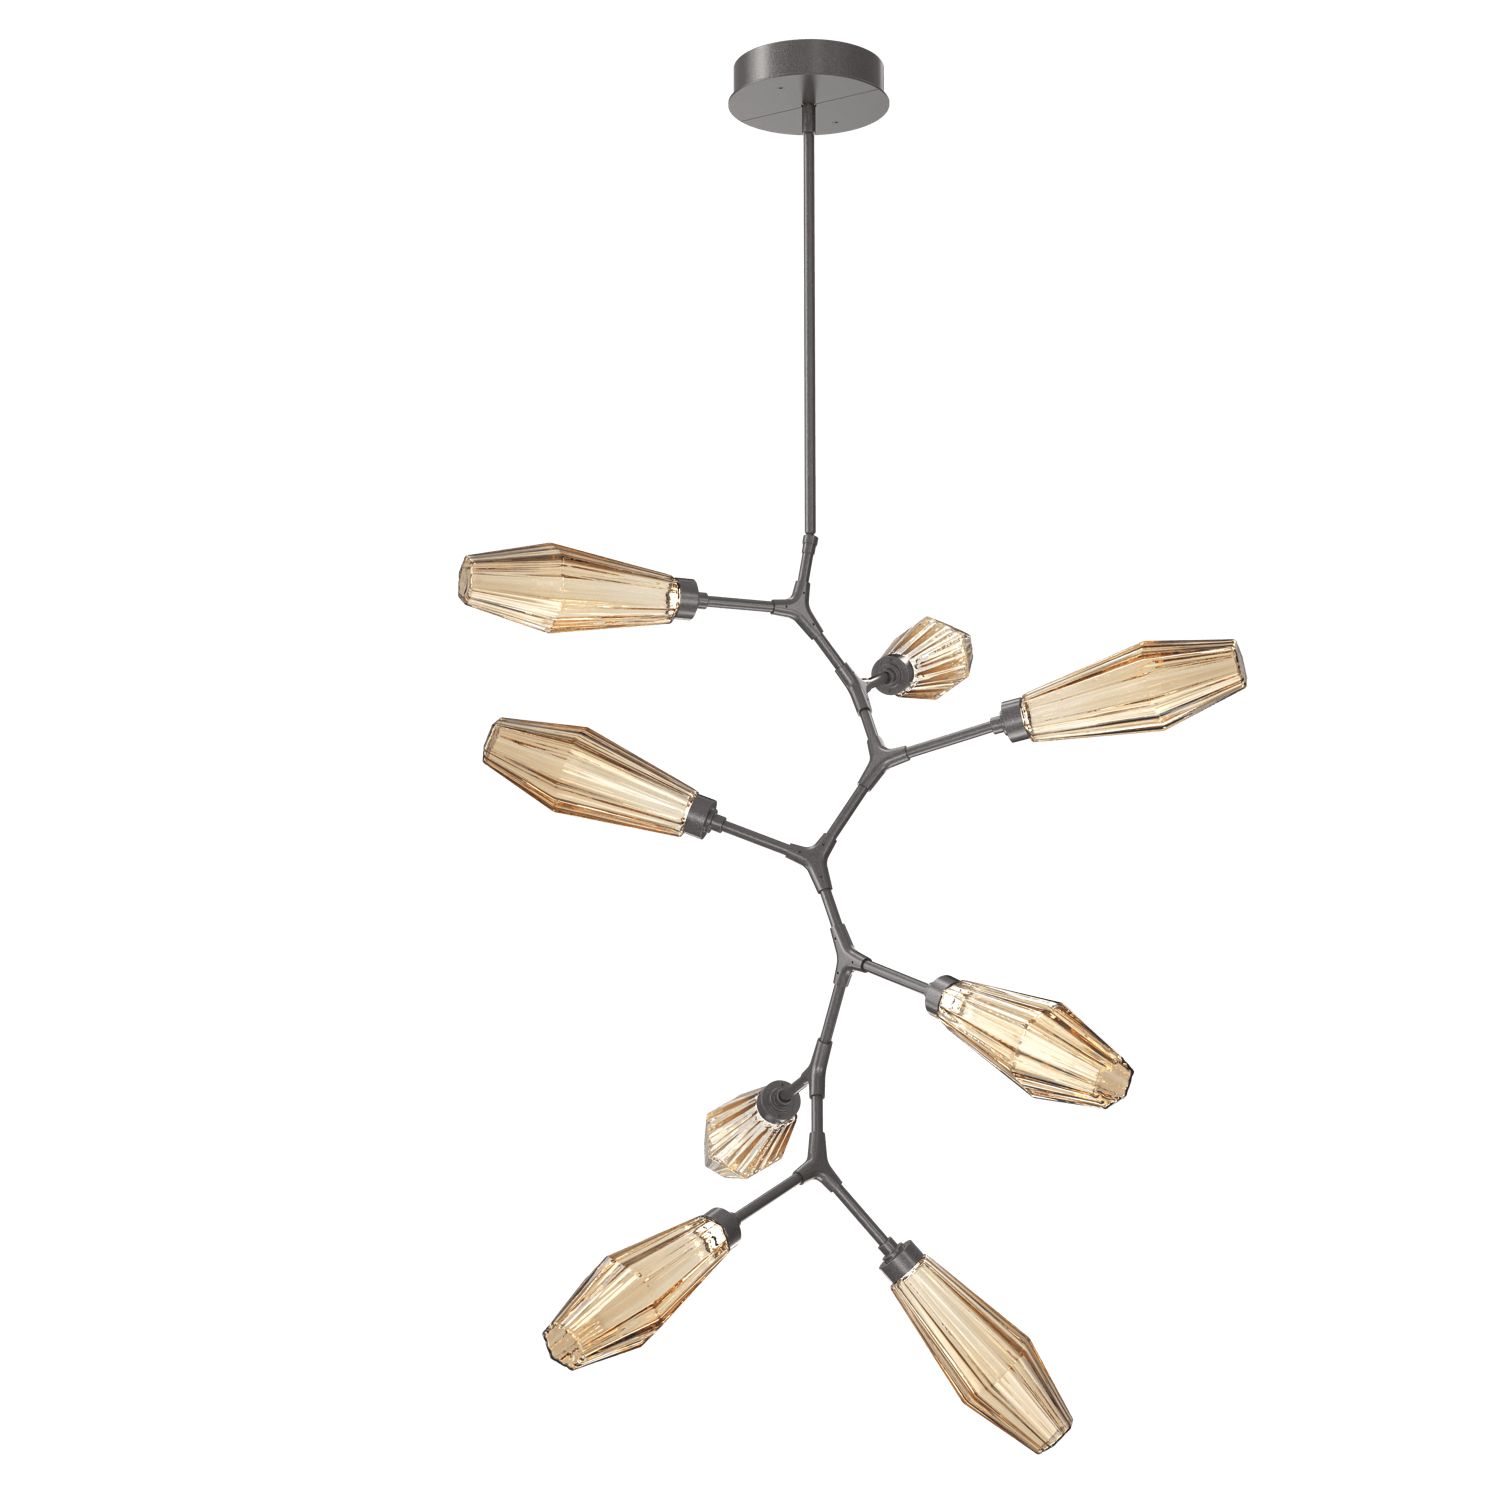 CHB0049-VB-GP-RB-Hammerton-Studio-Aalto-8-light-modern-vine-chandelier-with-graphite-finish-and-optic-ribbed-bronze-glass-shades-and-LED-lamping